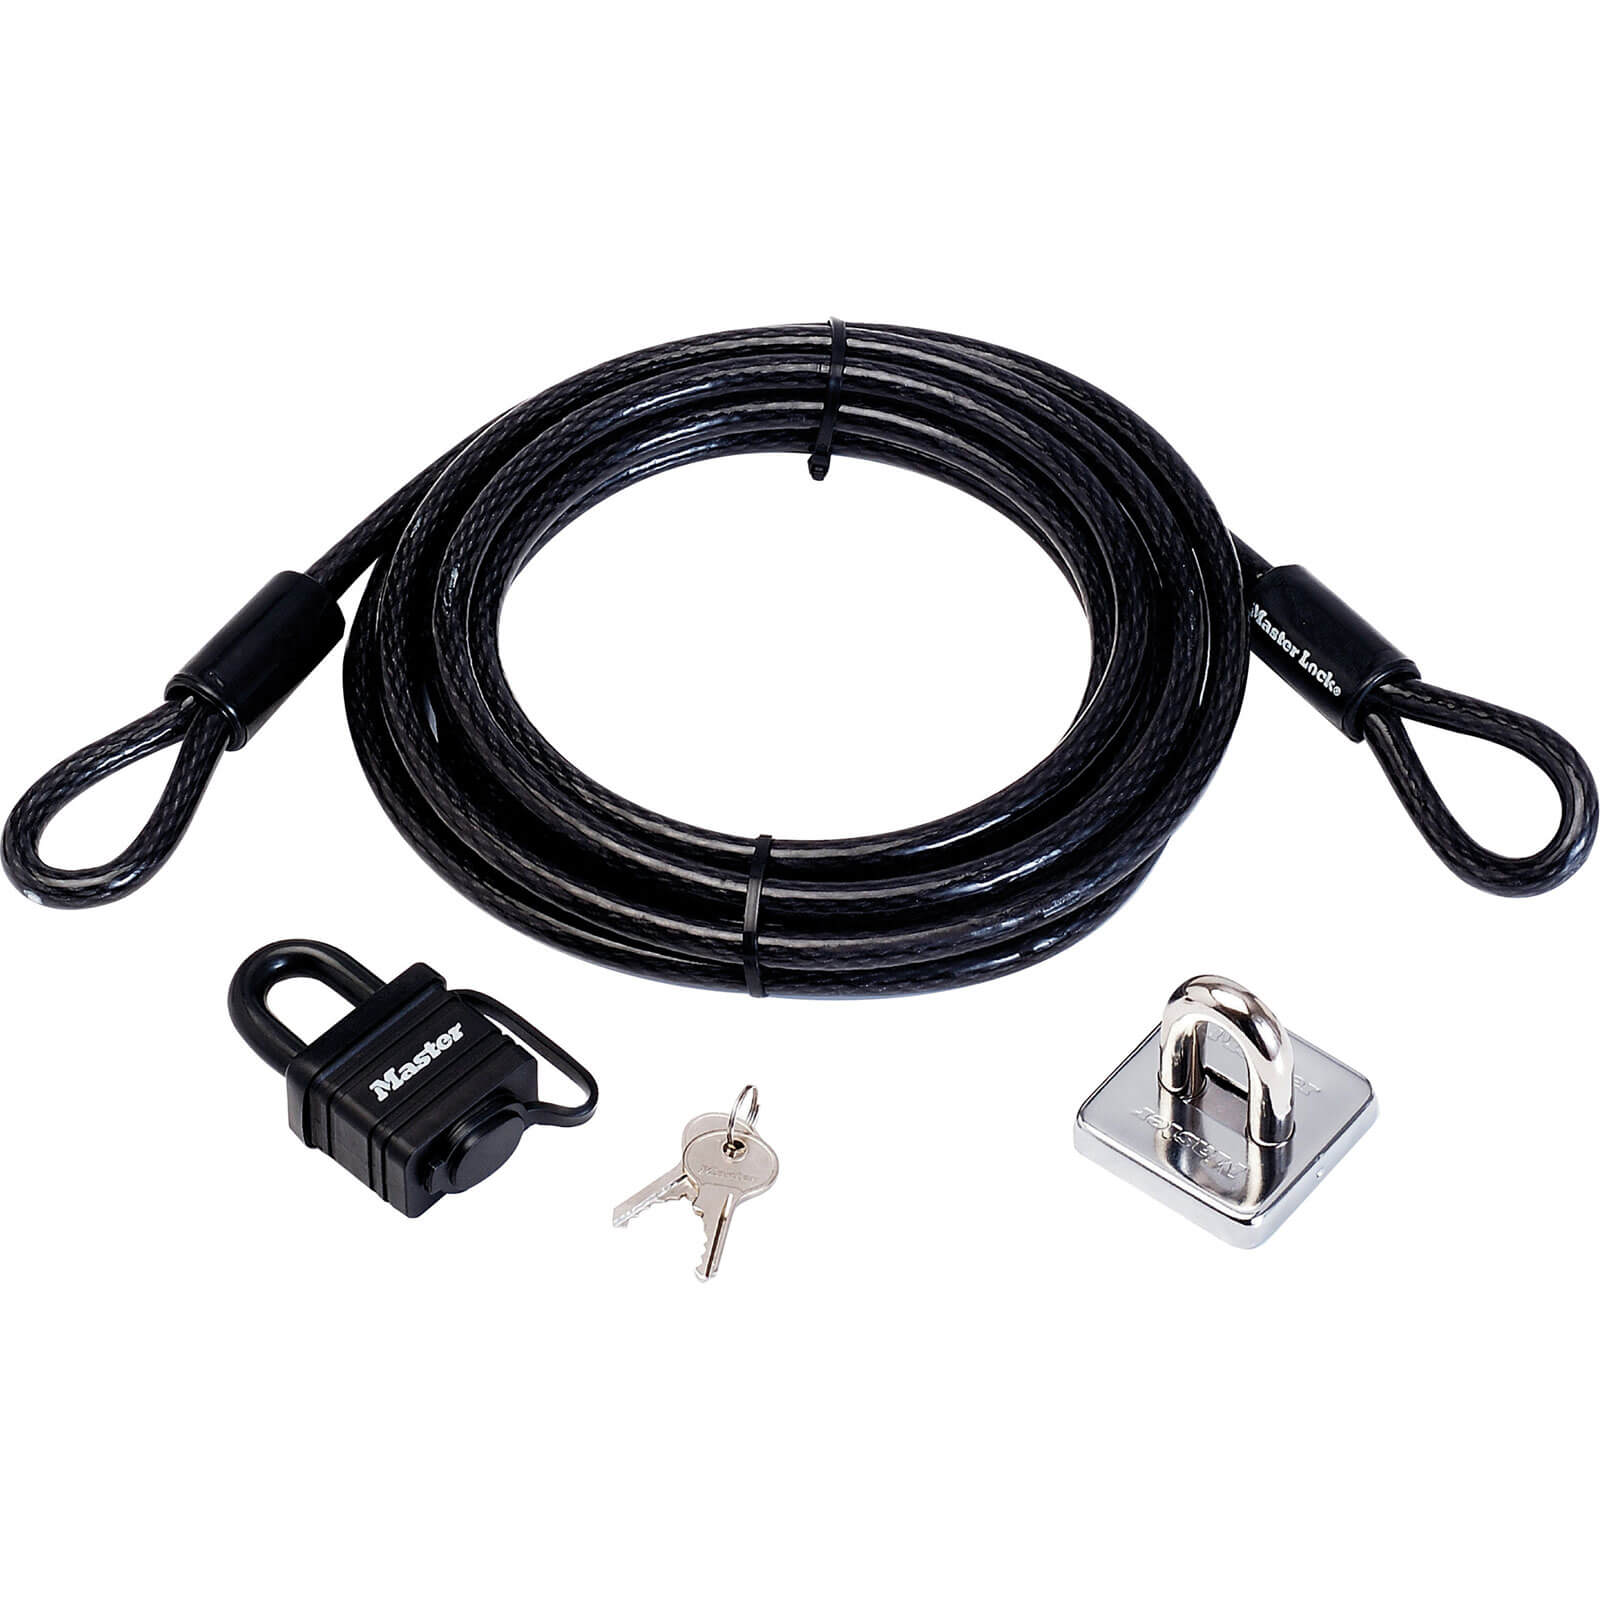 Image of Masterlock Cable Lock and Anchor Garden Security Kit